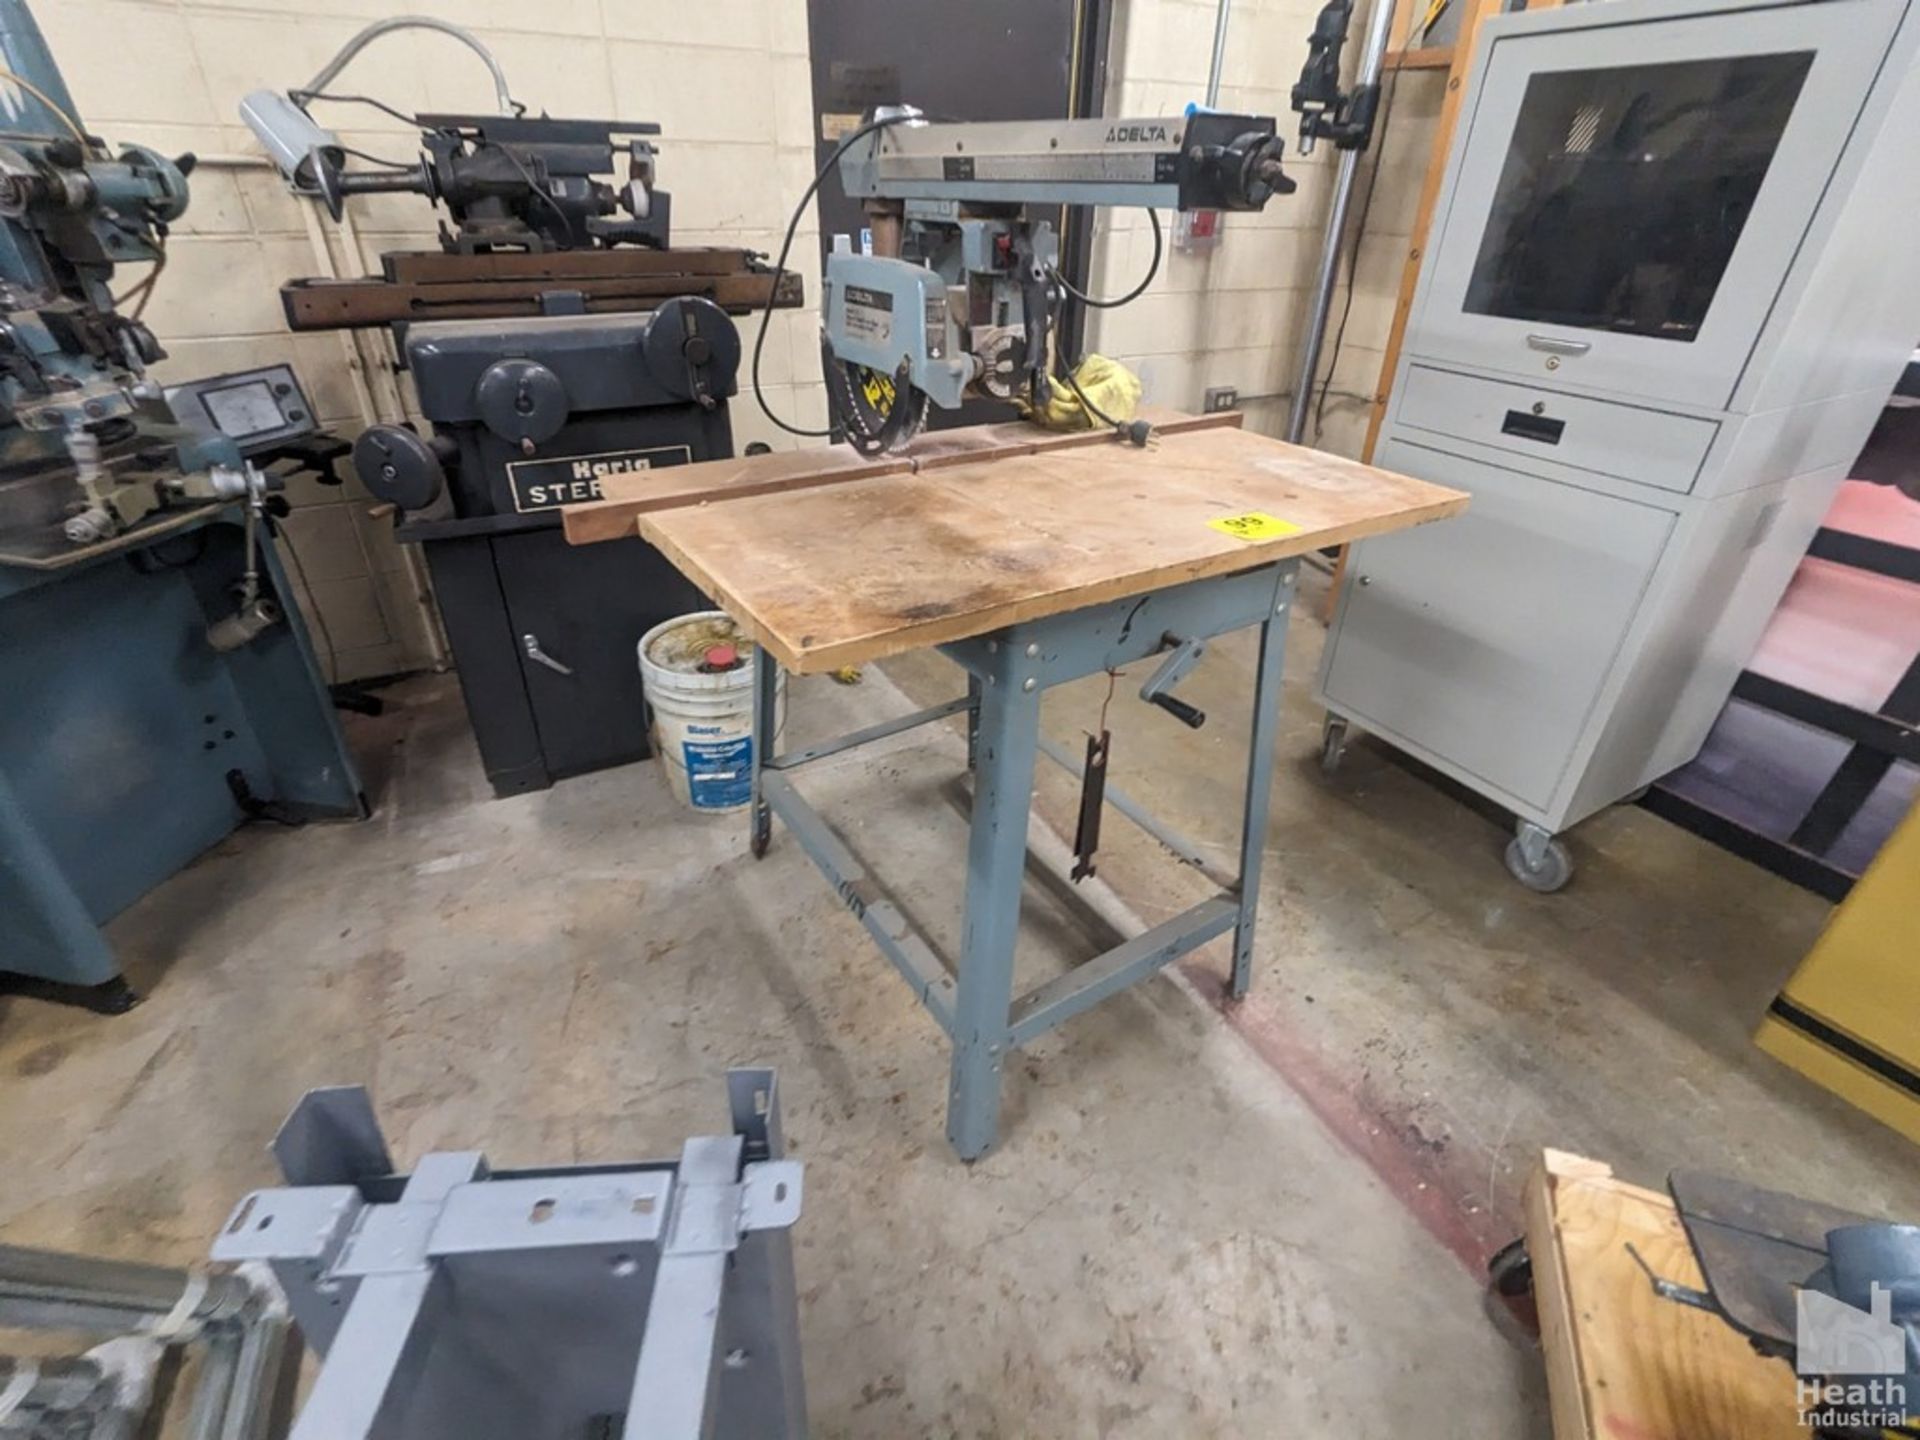 DELTA MODEL 10 DELUXE RADIAL ARM SAW WITH AUTOMATIC BRAKE Loading Fee :$100